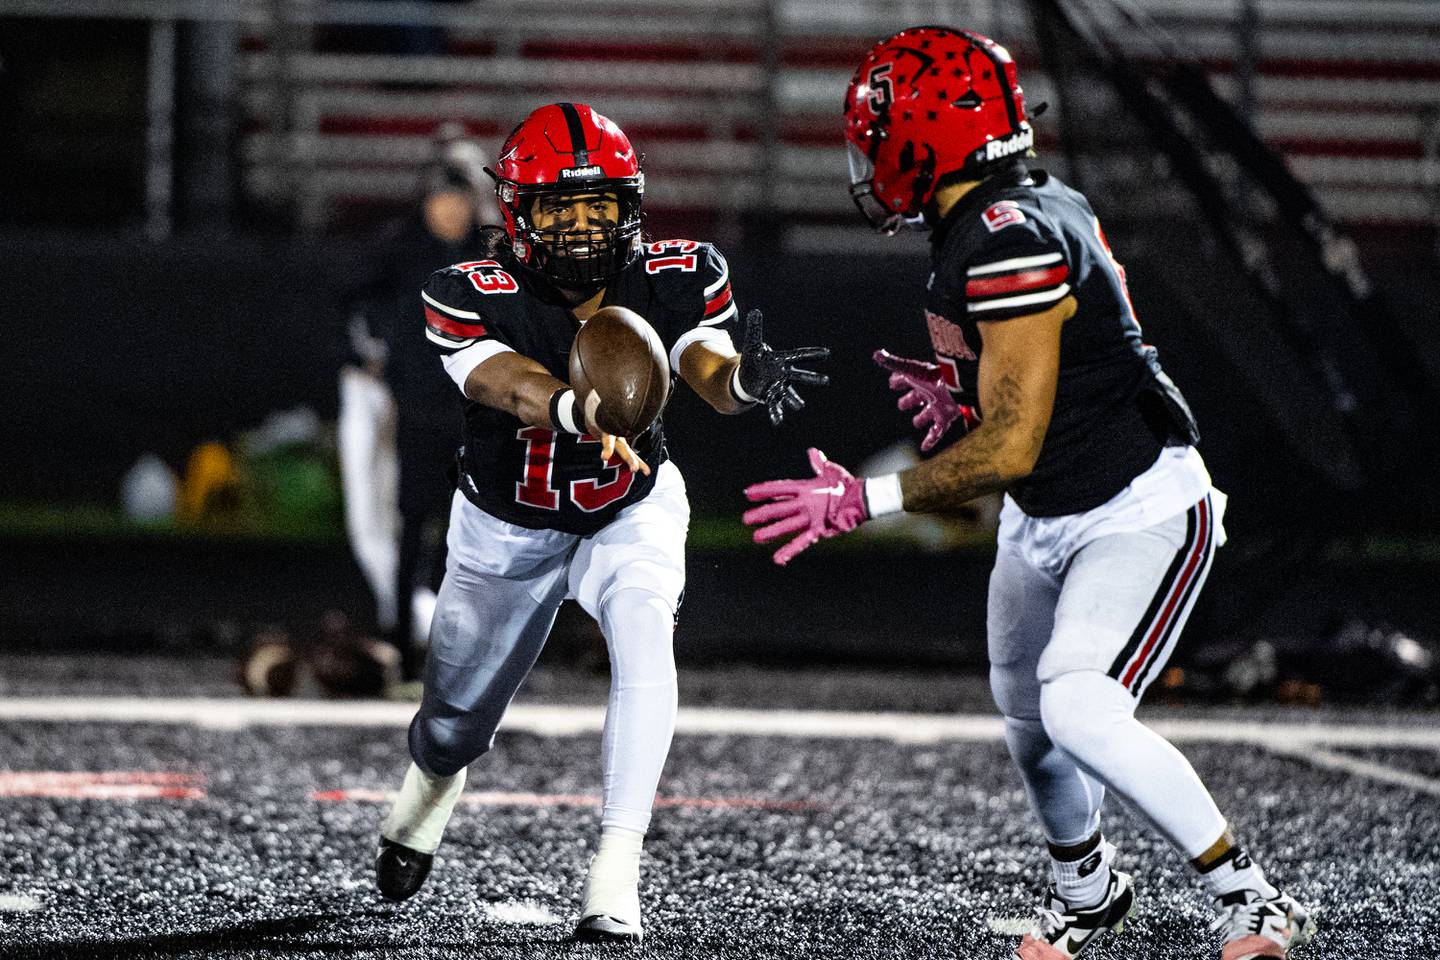 Bolingbrook's Jonas Williams tosses the ball to Darnell Stephens during a game against Lockport on Friday Oct. 13, 2023 at Bolingbrook High School